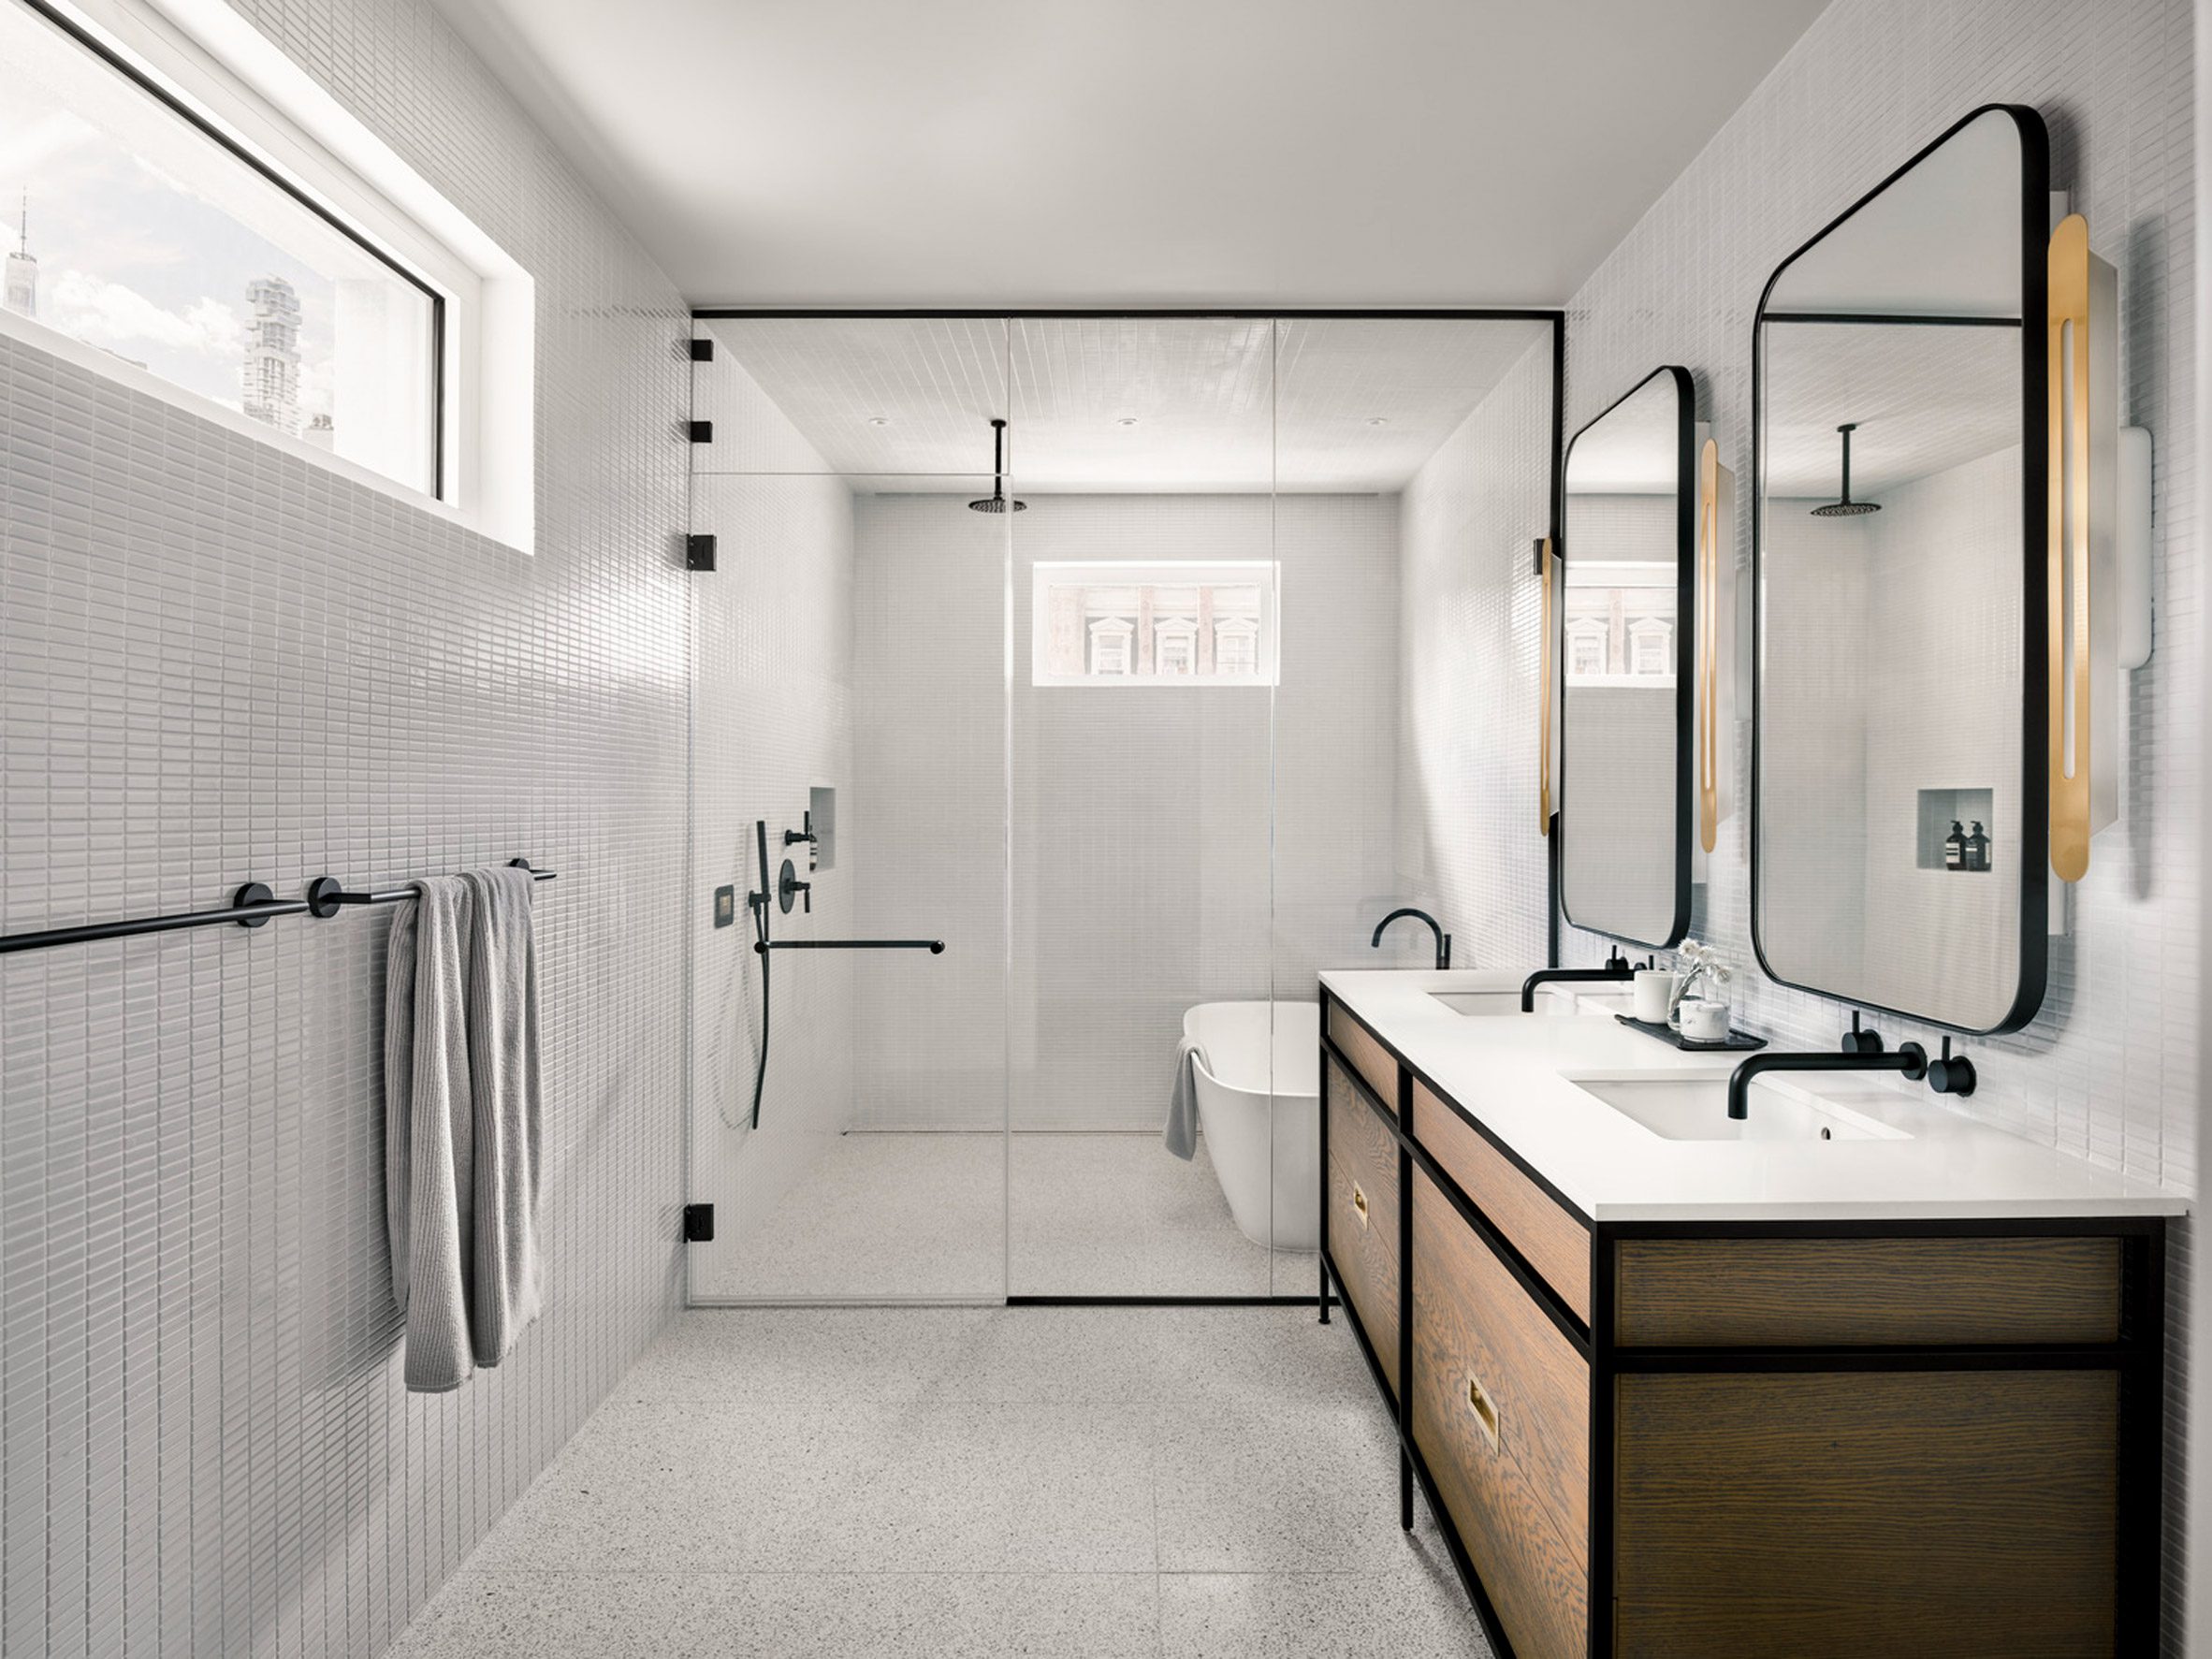 Interior of a white bathroom with a walk-in wet room and wooden vanity units